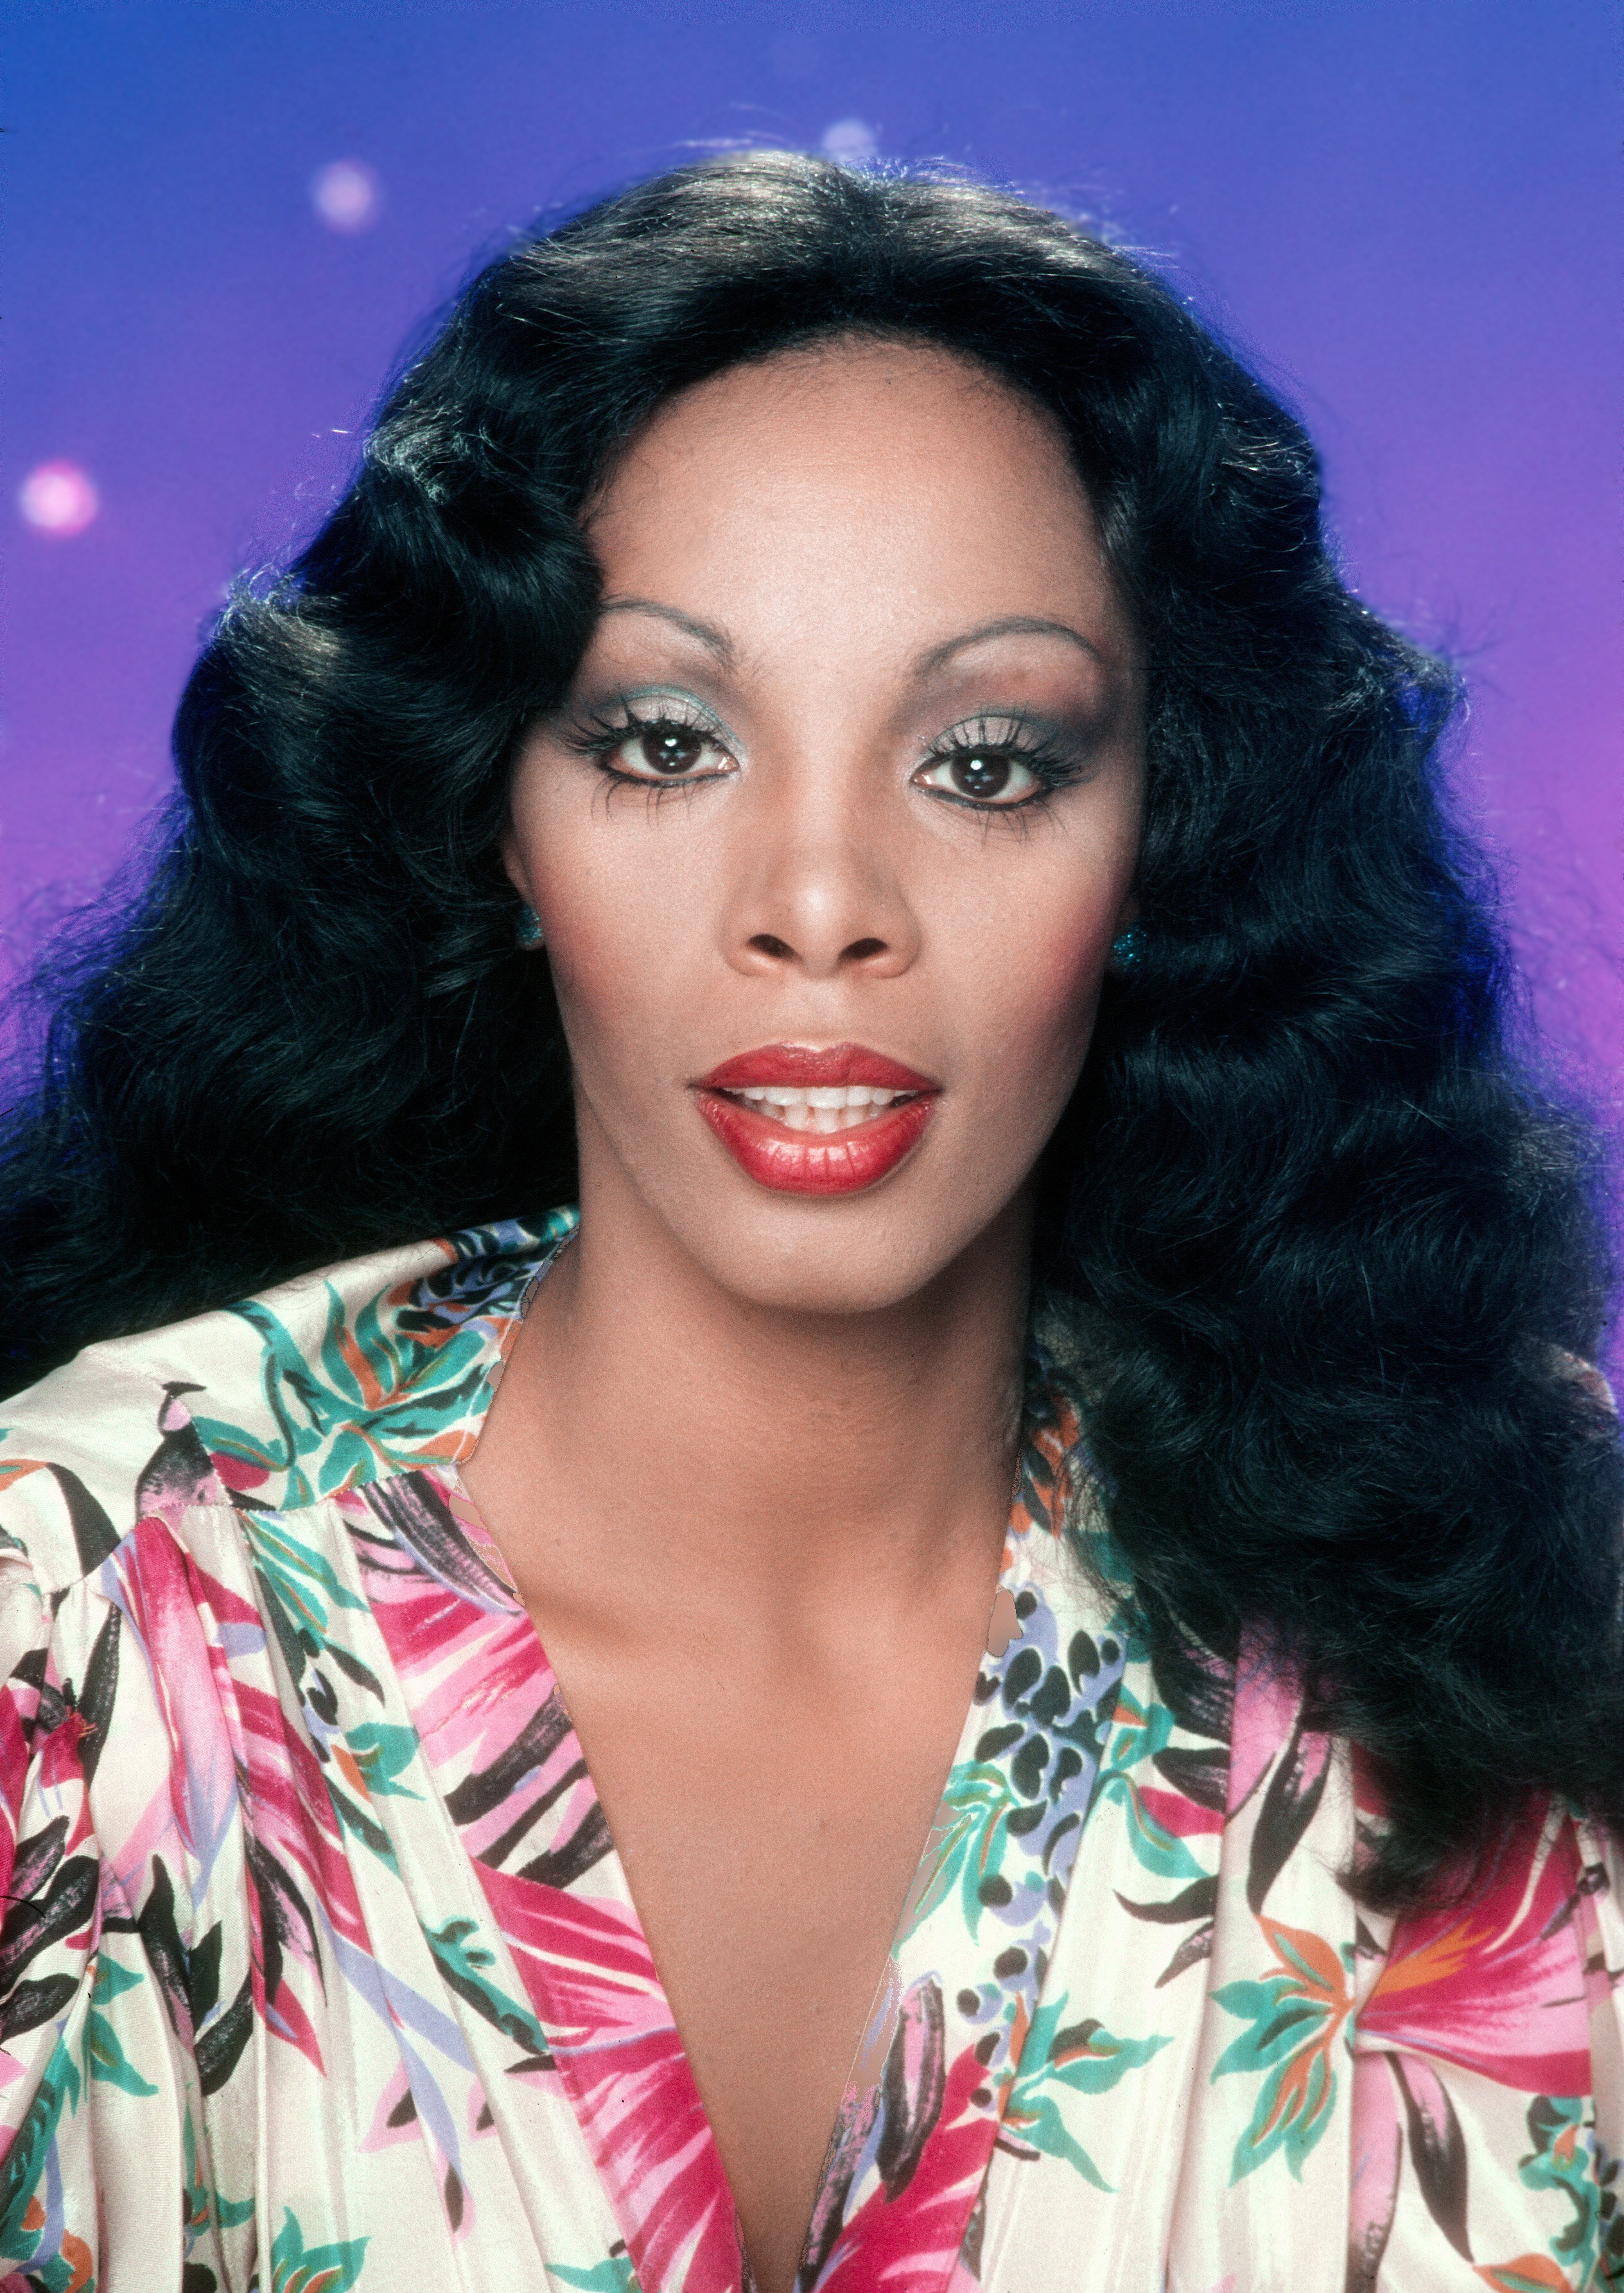 Donna Summer poses for an album cover session on May 16, 1978 in Los Angeles, California | Source: Getty Images